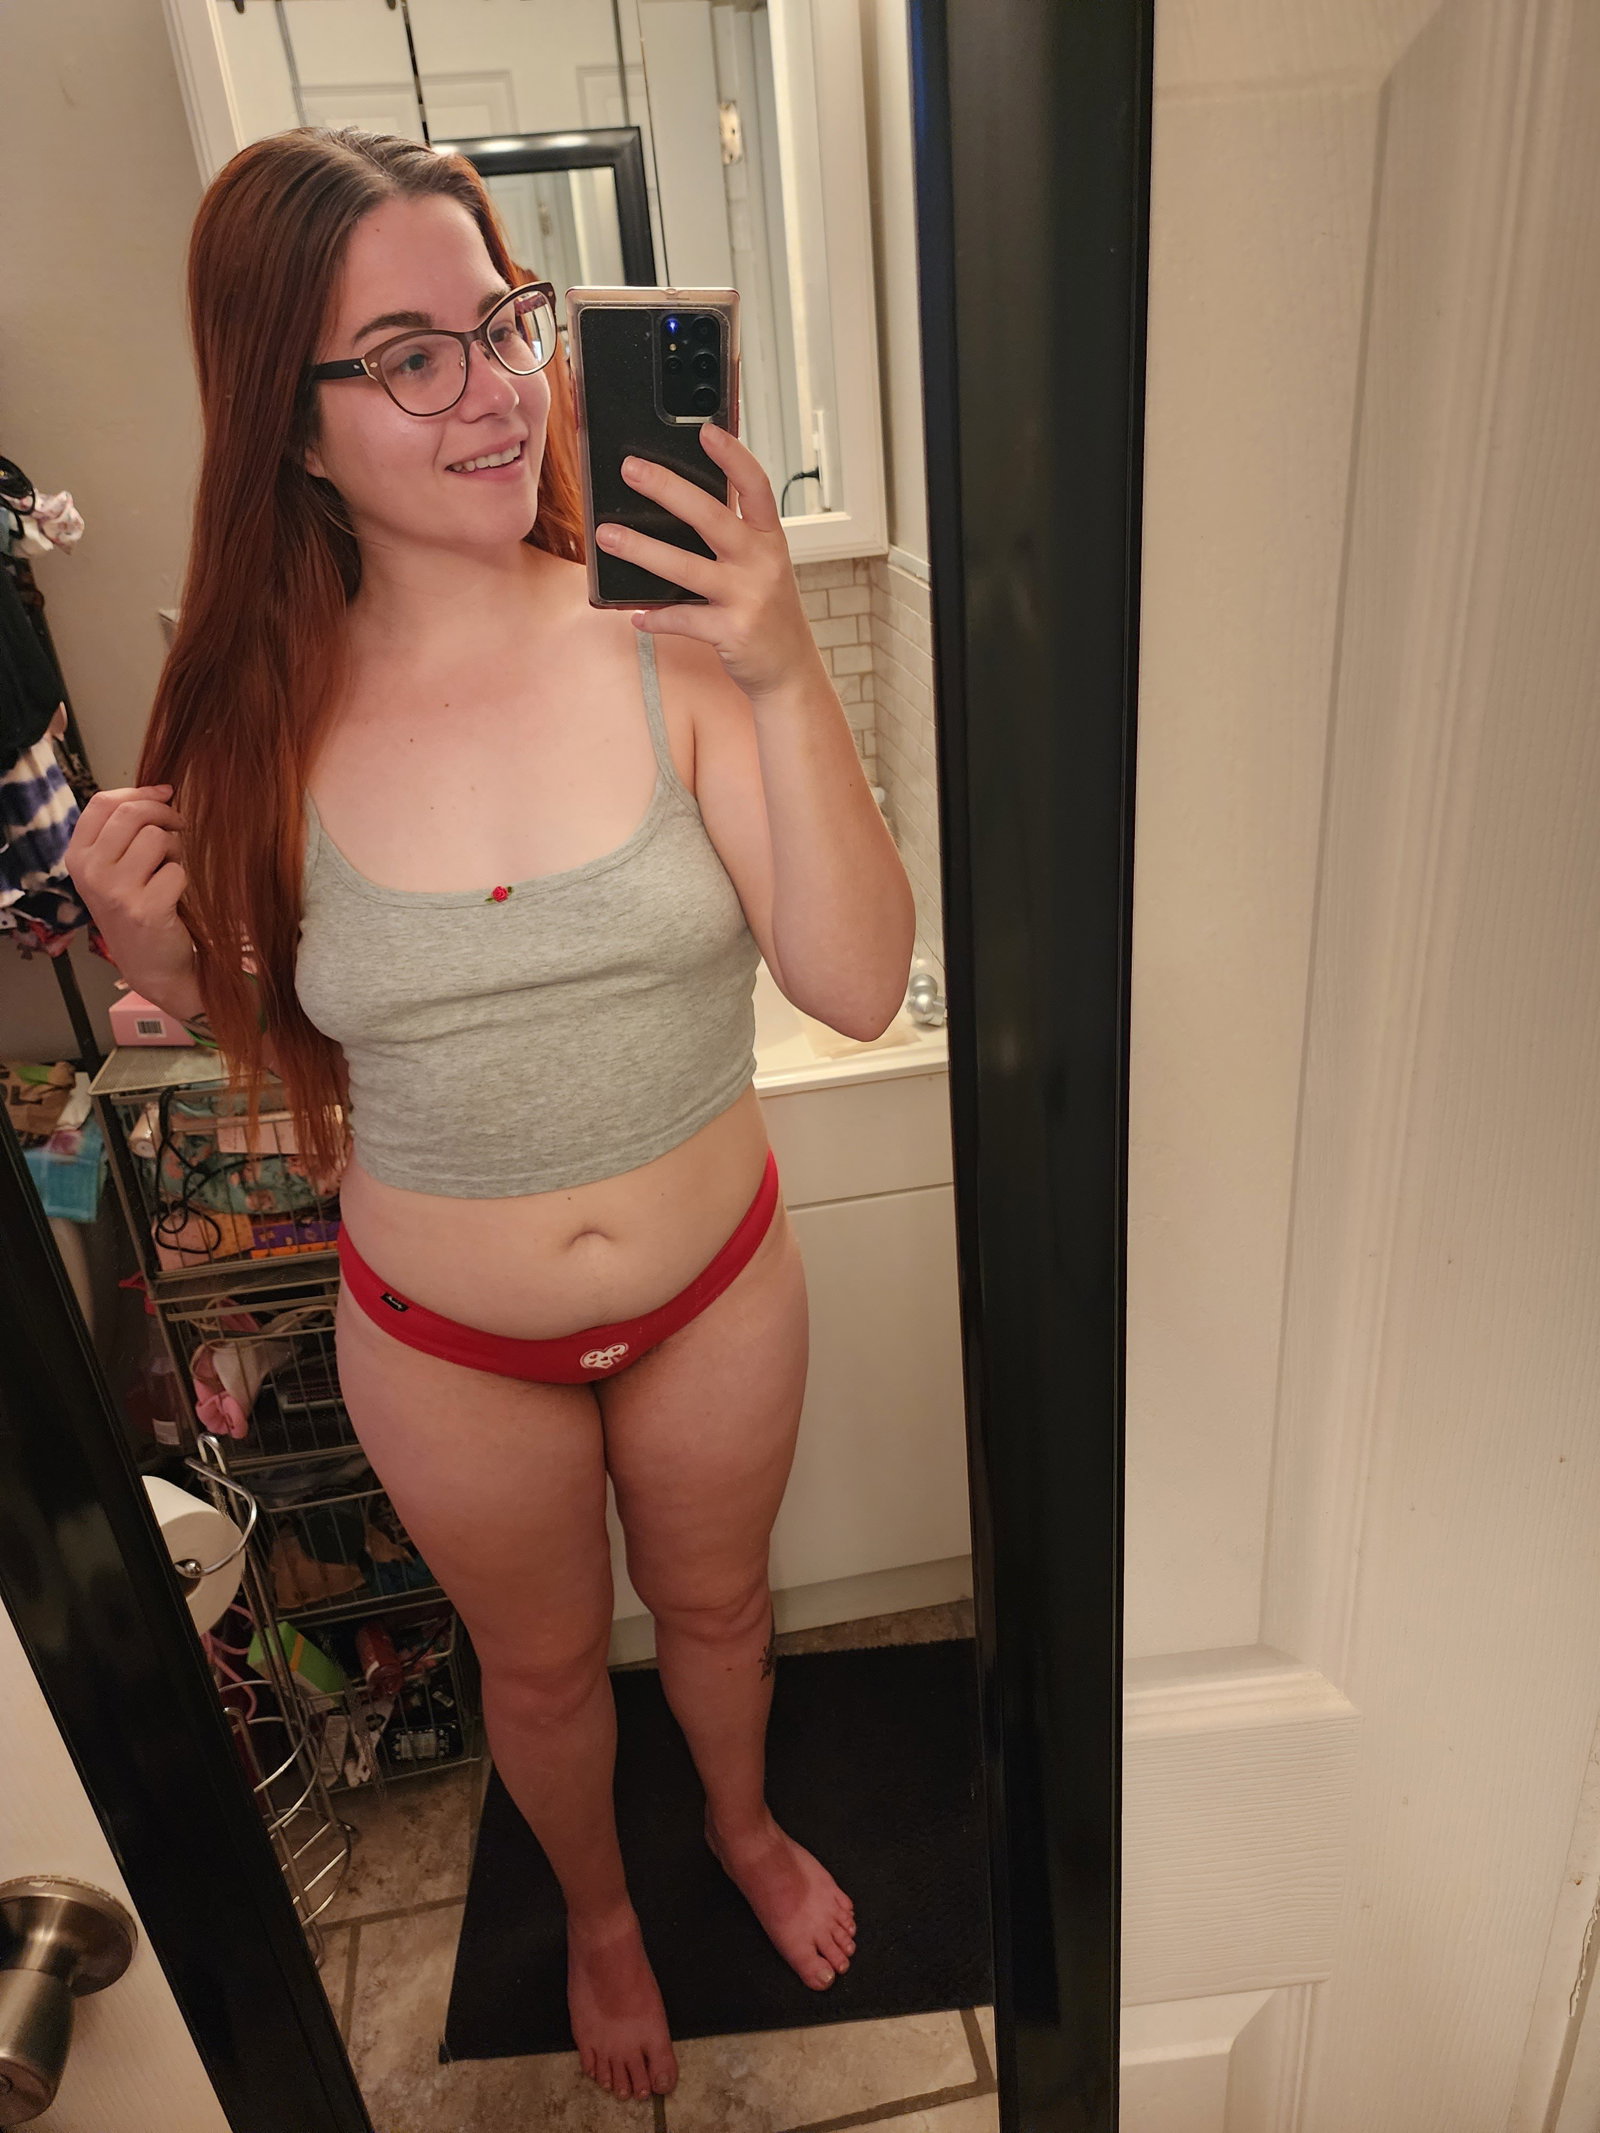 Watch the Photo by ThatLittleBrat with the username @ThatLittleBrat, who is a verified user, posted on June 12, 2023. The post is about the topic Amateurs. and the text says 'Just sharing tonight's cute outfit, now I need someone to come play with me 😌💋

#sexy #cute #fun #shygirl #longhair #redhair #glasses #tattoos #clothed #tits #boobies #ass #panties #amateurselfies #selfies #bathroomselfie #playwithme #shareme..'